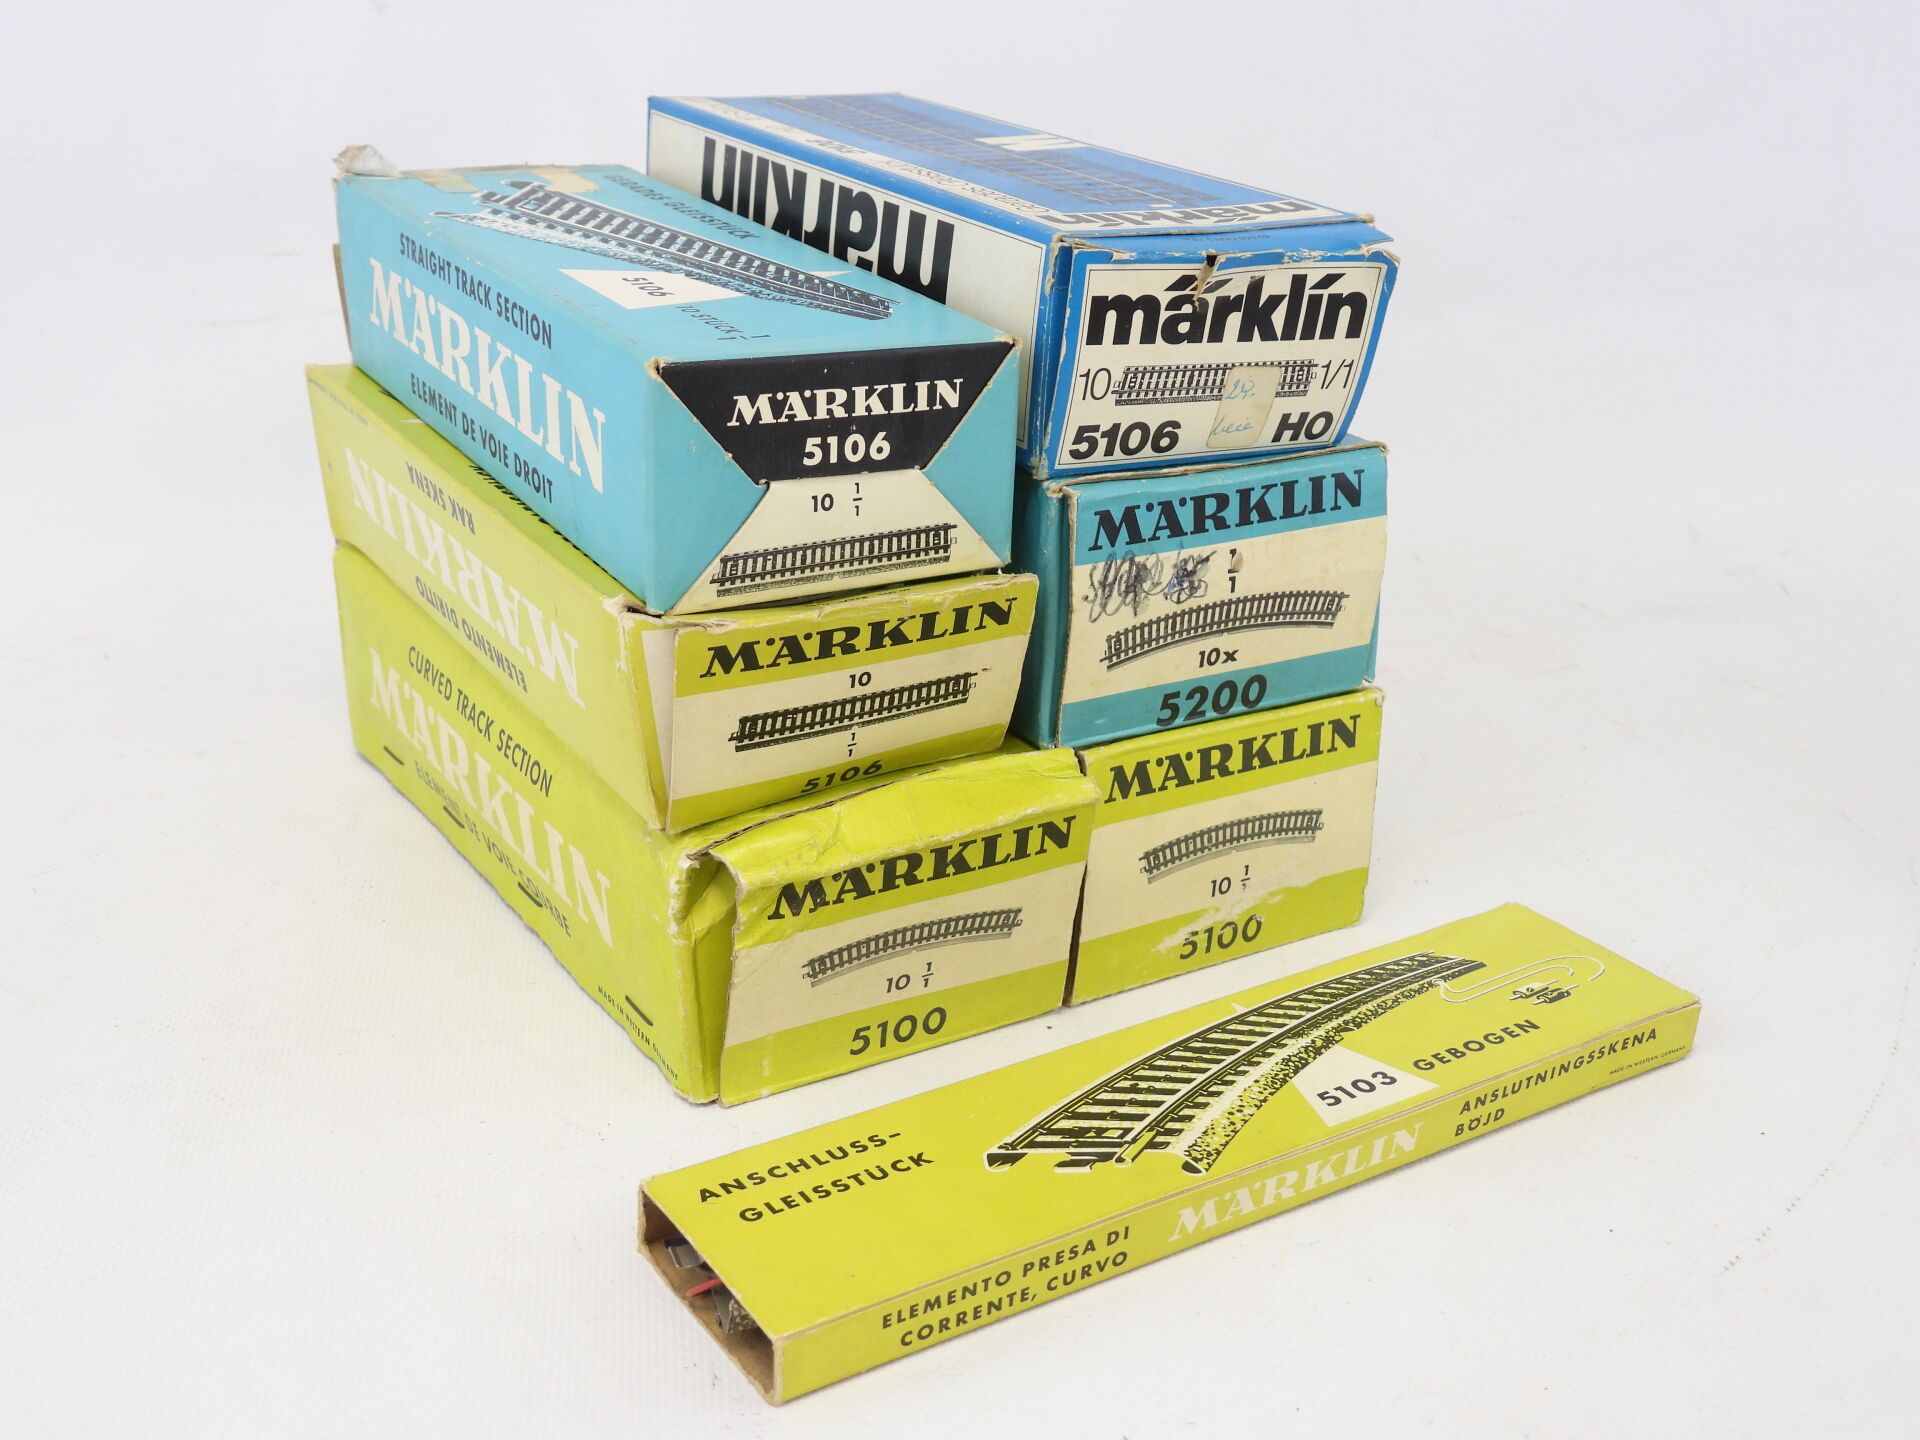 Null MARKLIN: Set of 7 boxes of rails. Ref: 5106, 5103, 5100 and 5200